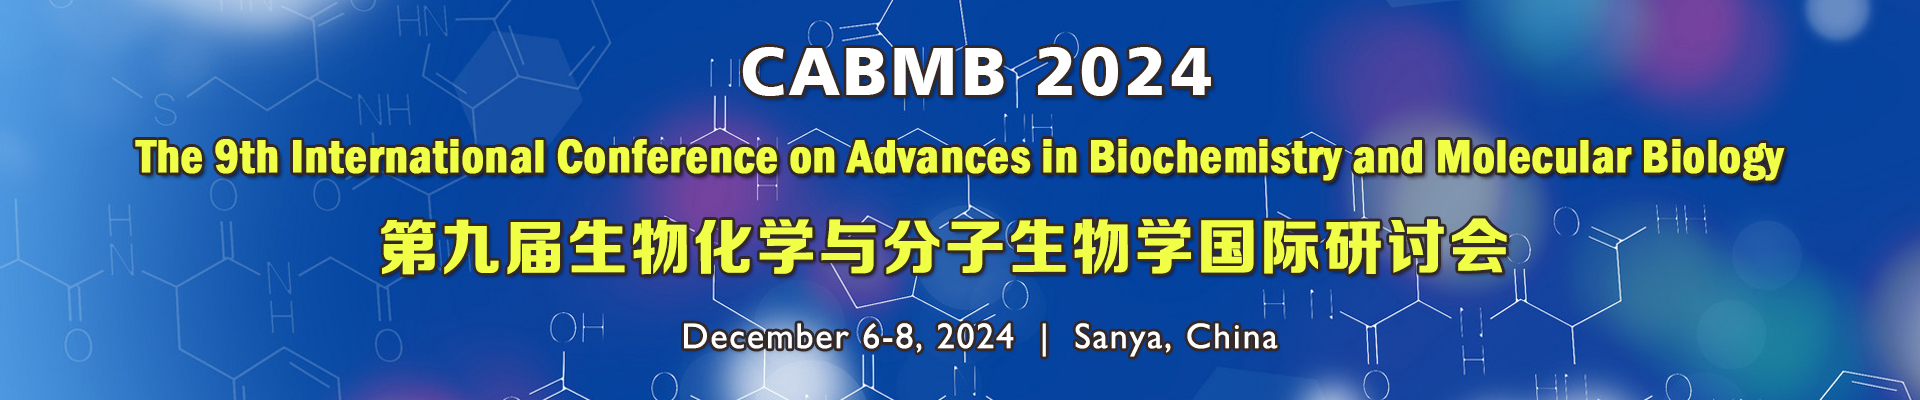 The 9th International Conference on Advances in Biochemistry and Molecular Biology (CABMB 2024), Sanya, Hainan, China